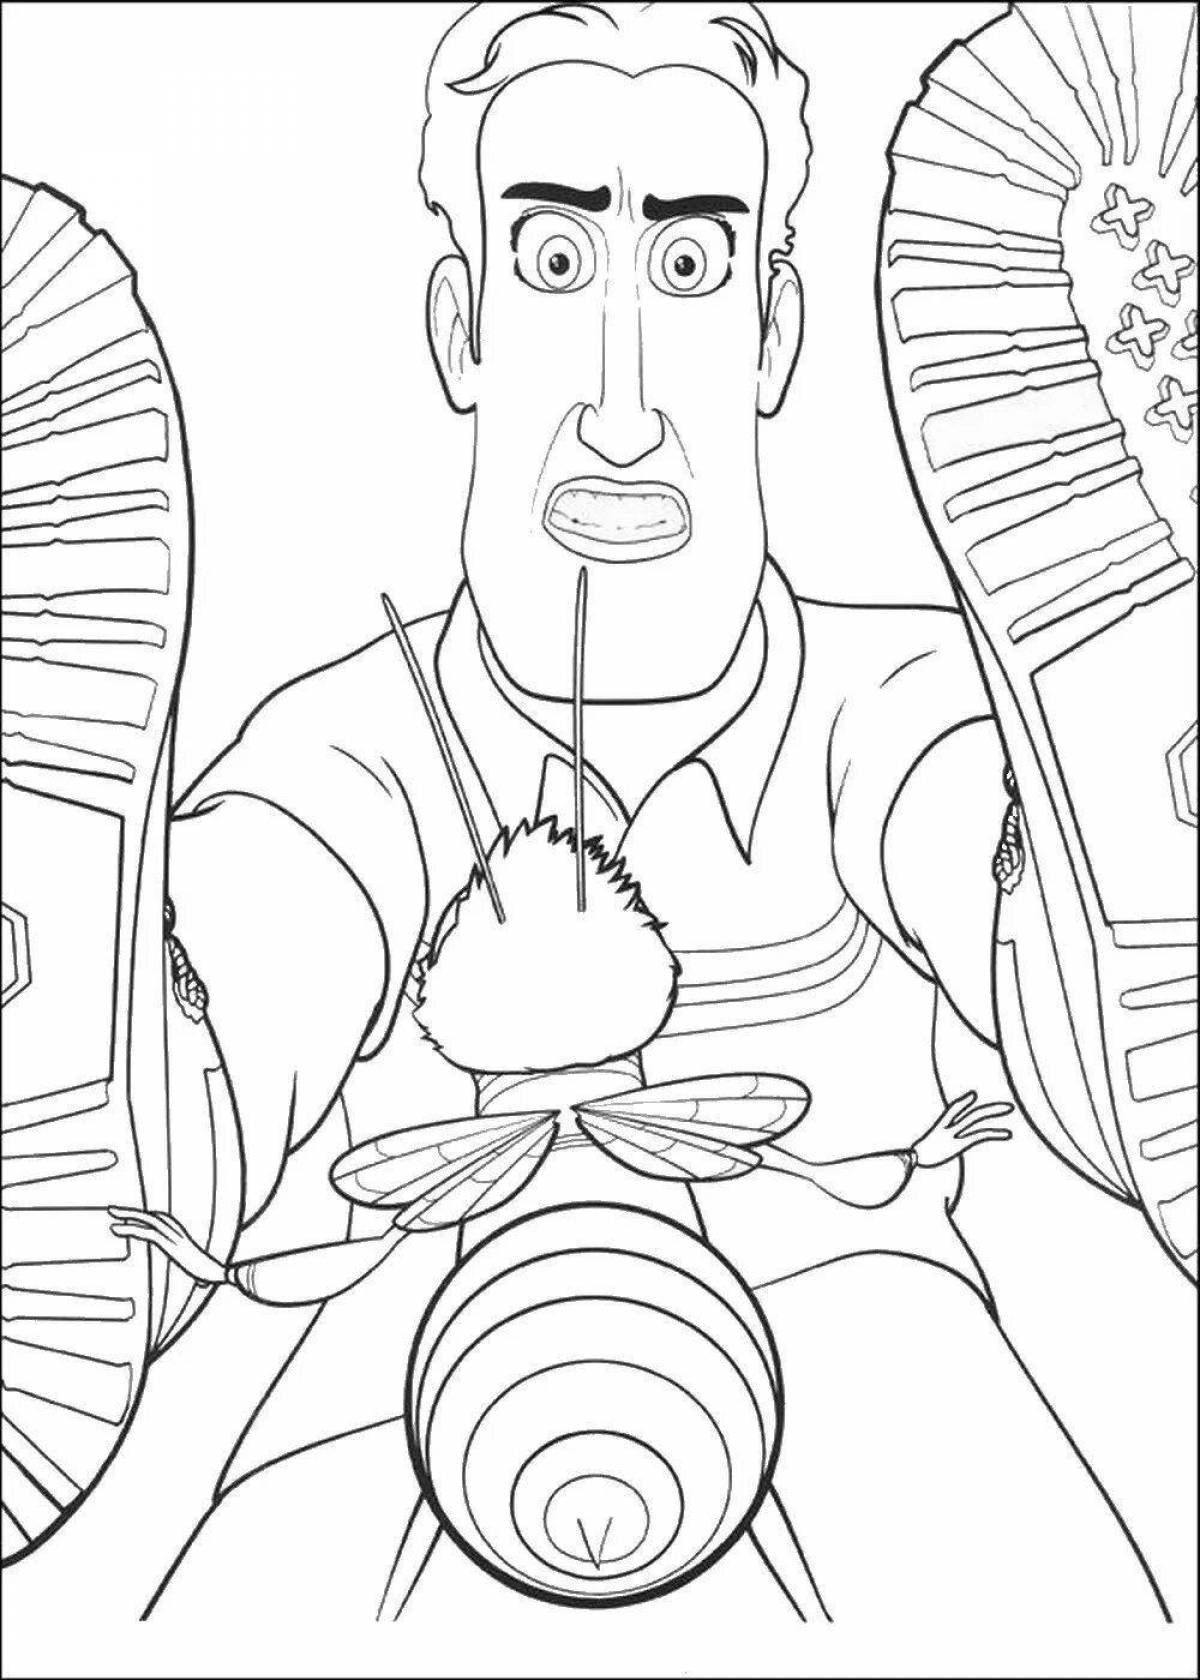 Glowing Honey Plot coloring page